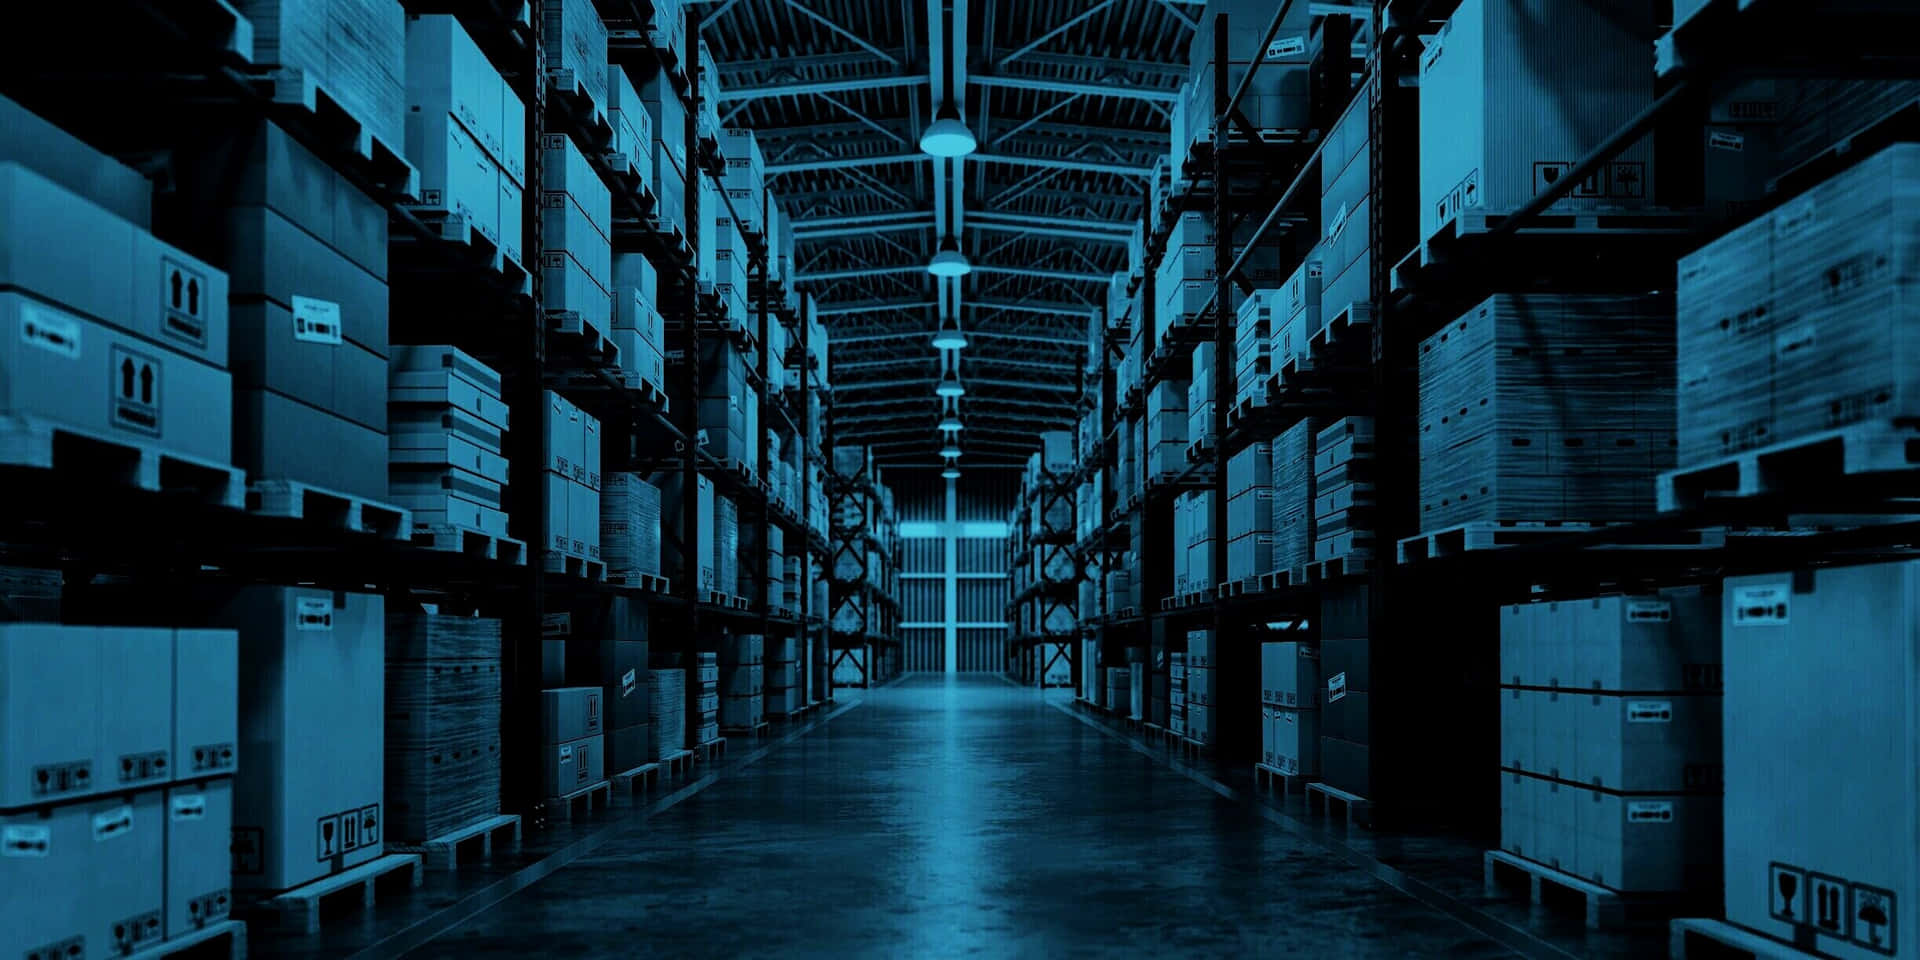 100+] Warehouse Background s | Wallpapers.com